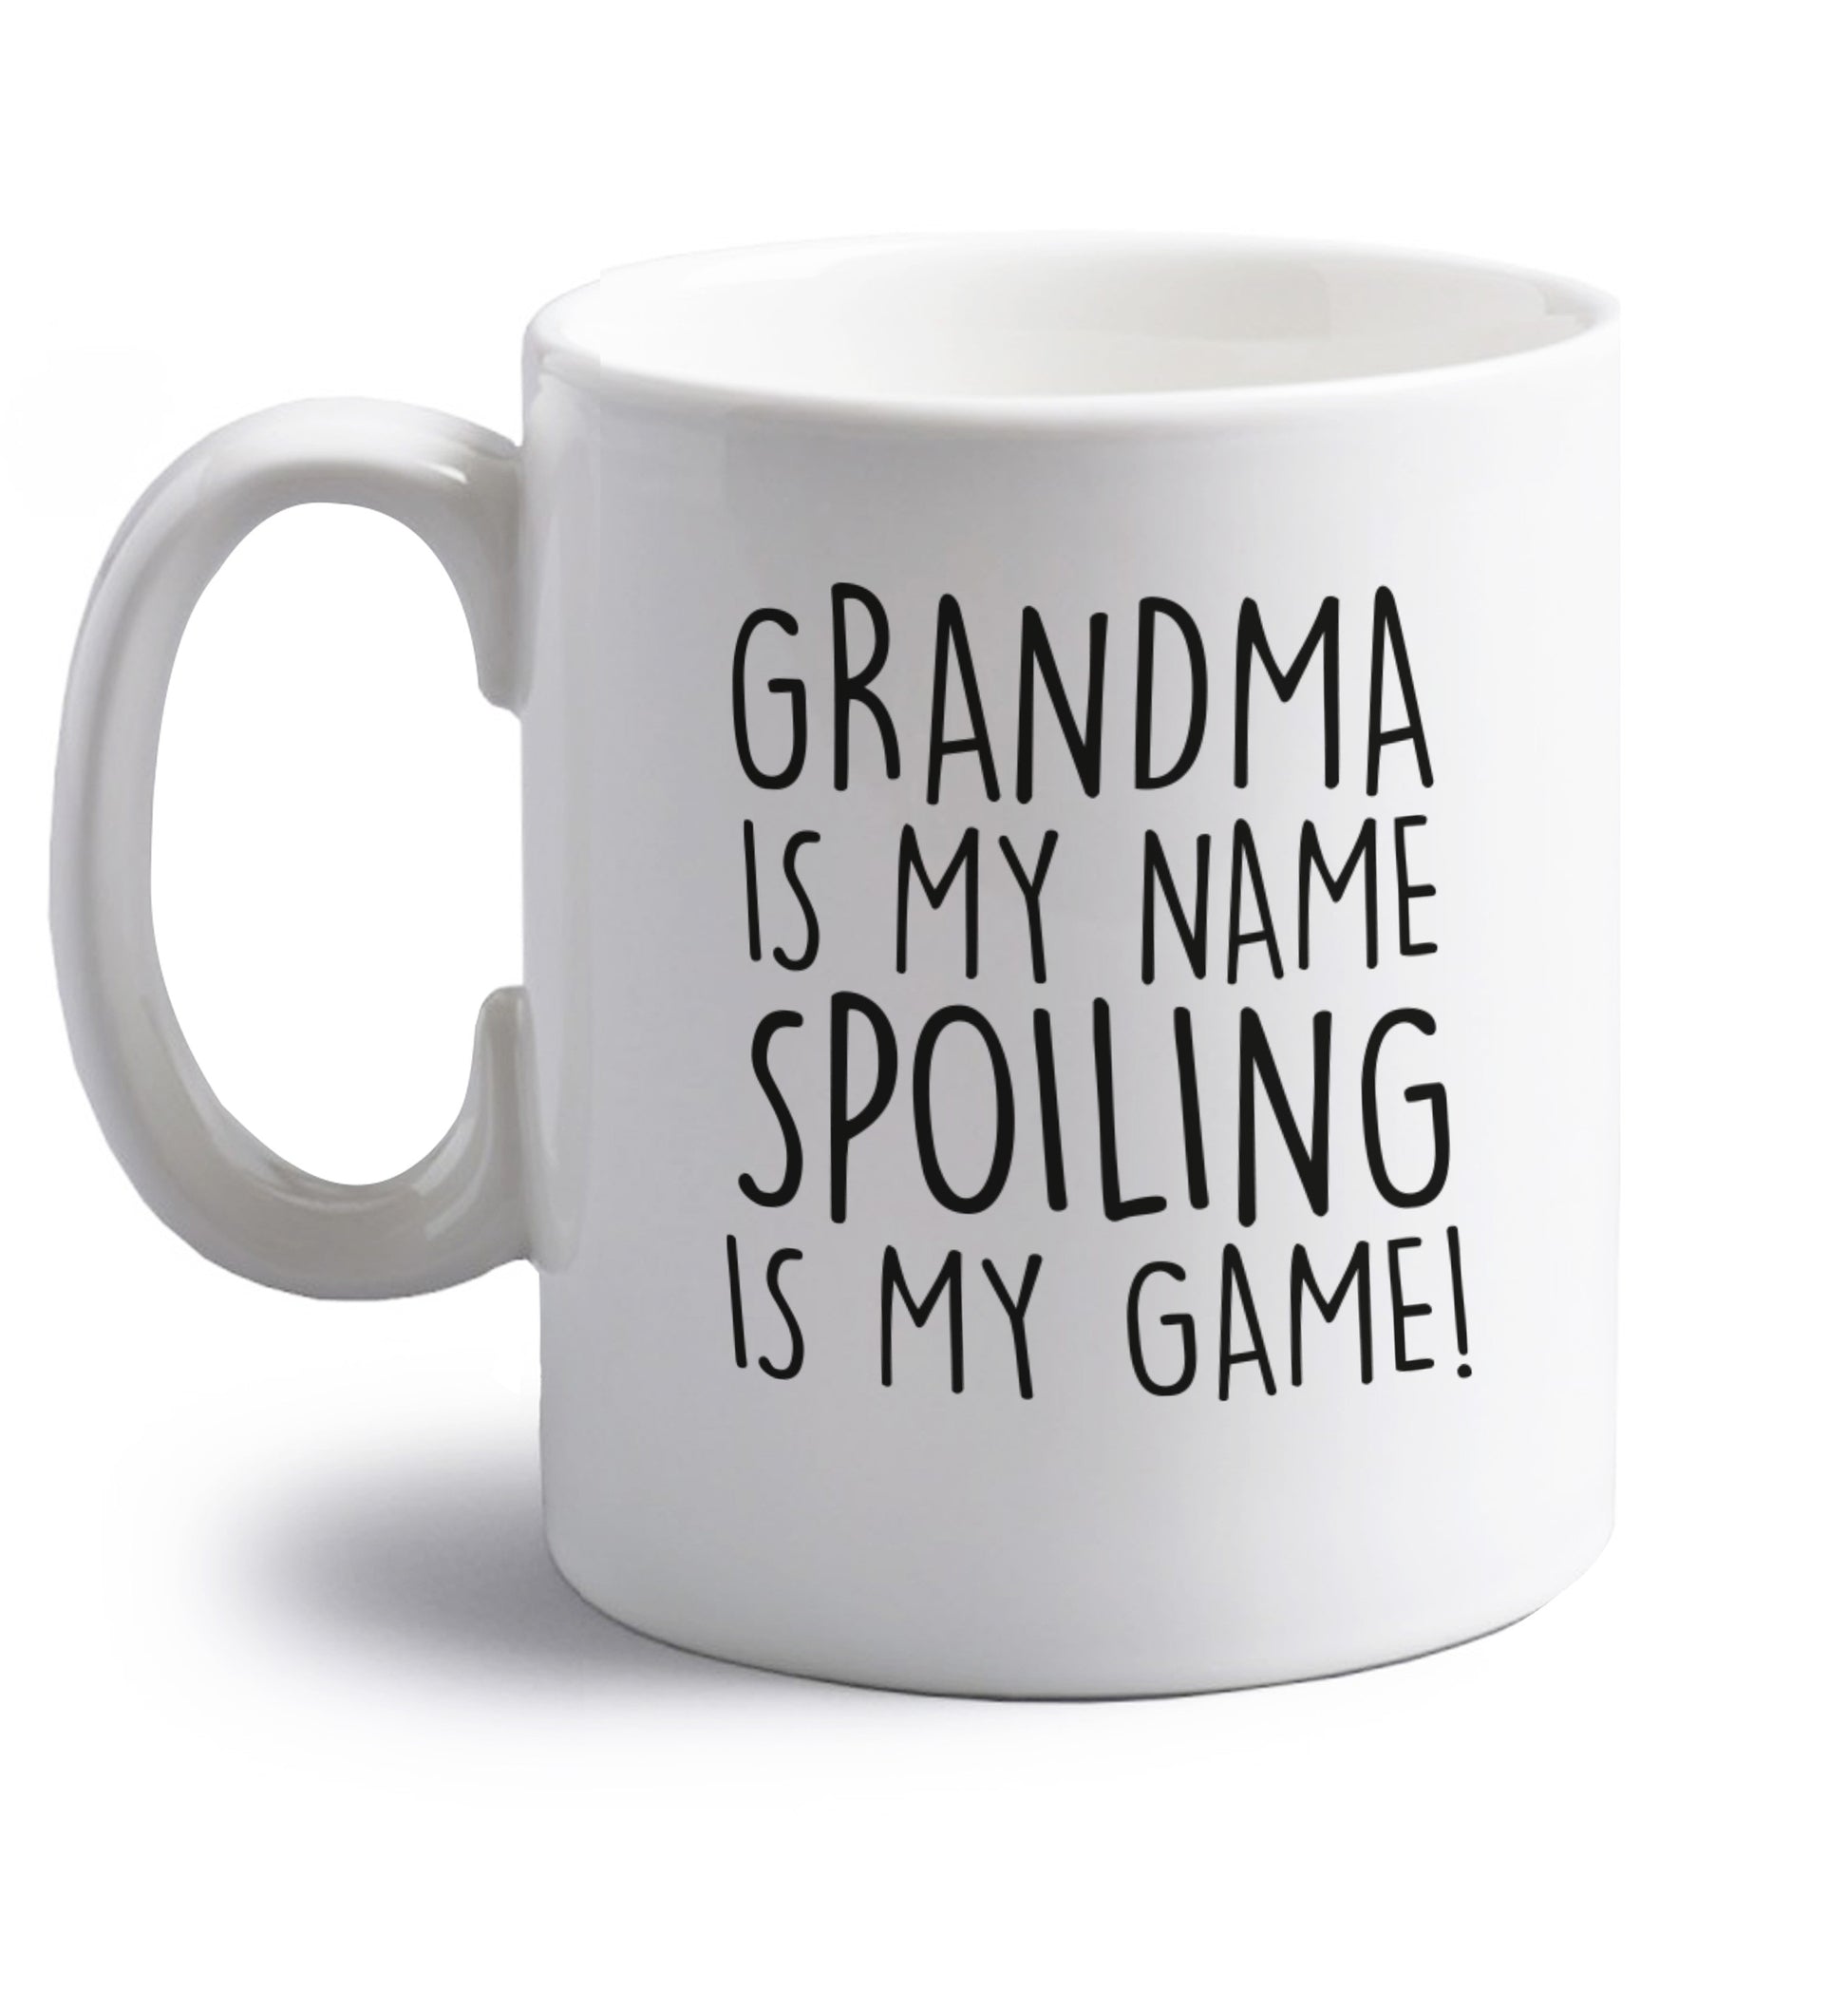 Grandma is my name, spoiling is my game right handed white ceramic mug 